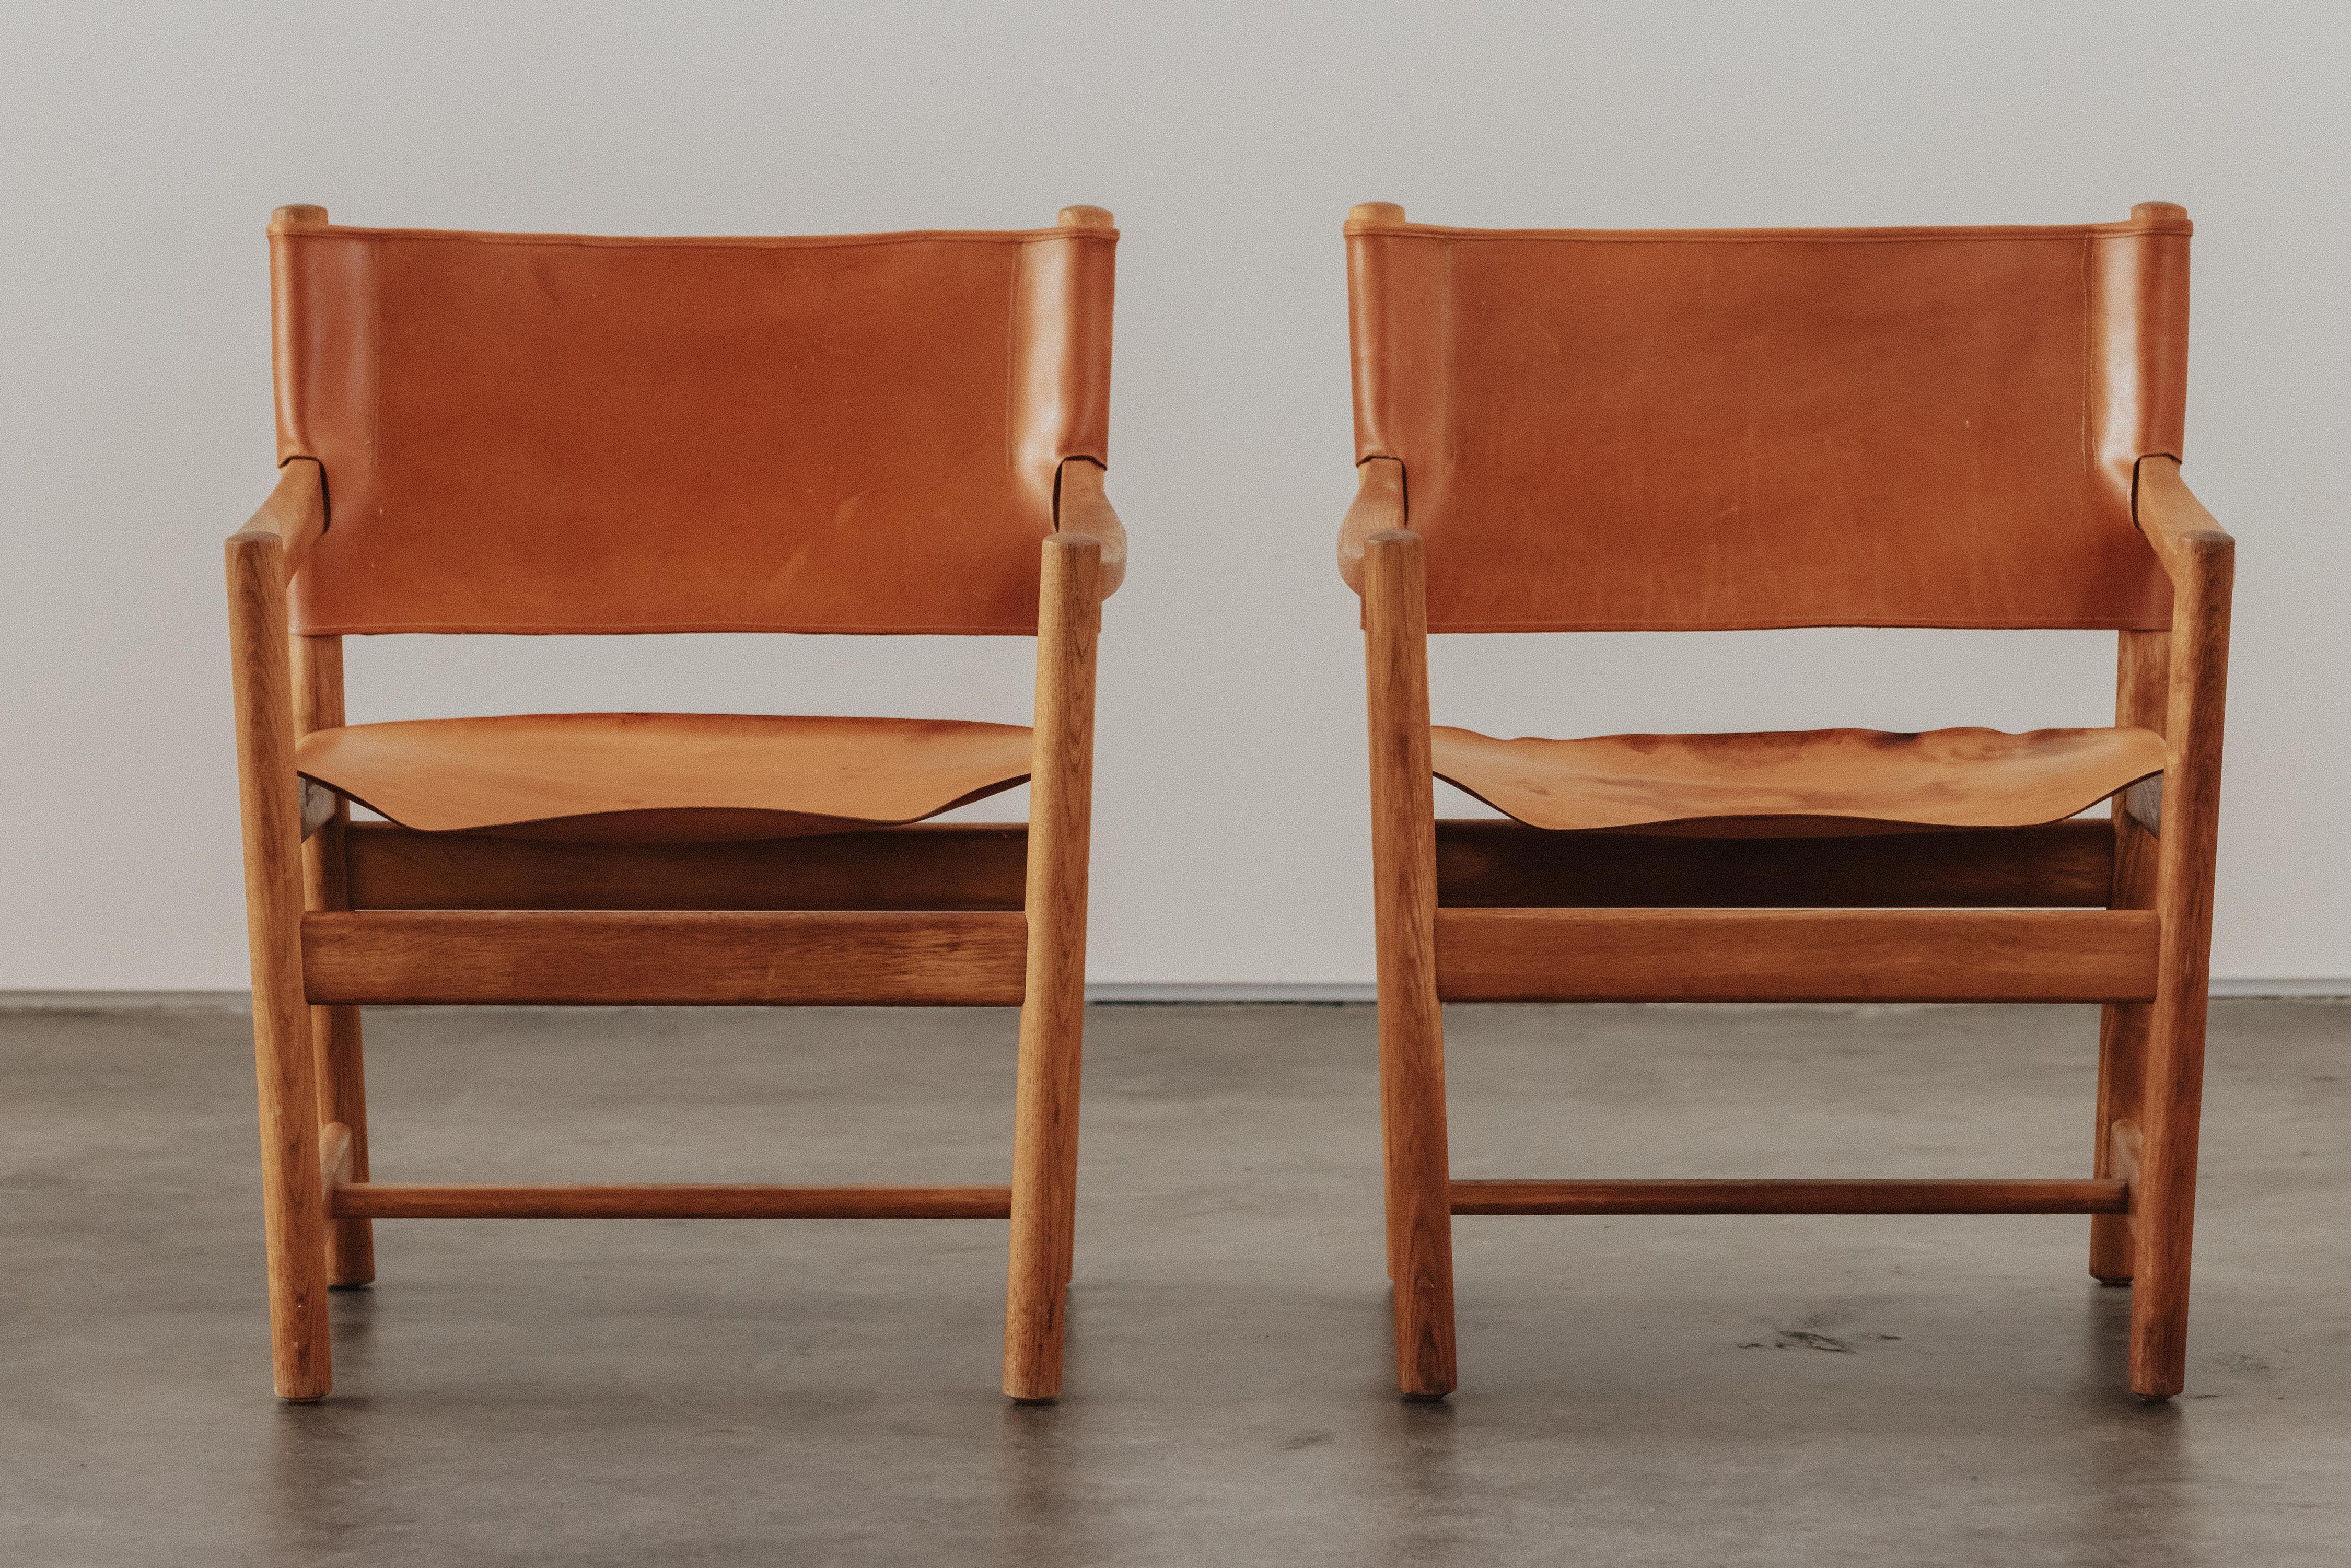 Vintage Pair Of Cognac Leather Lounge Chairs From Denmark, Circa 1970.  Solid oak construction.  Nice patina and use.